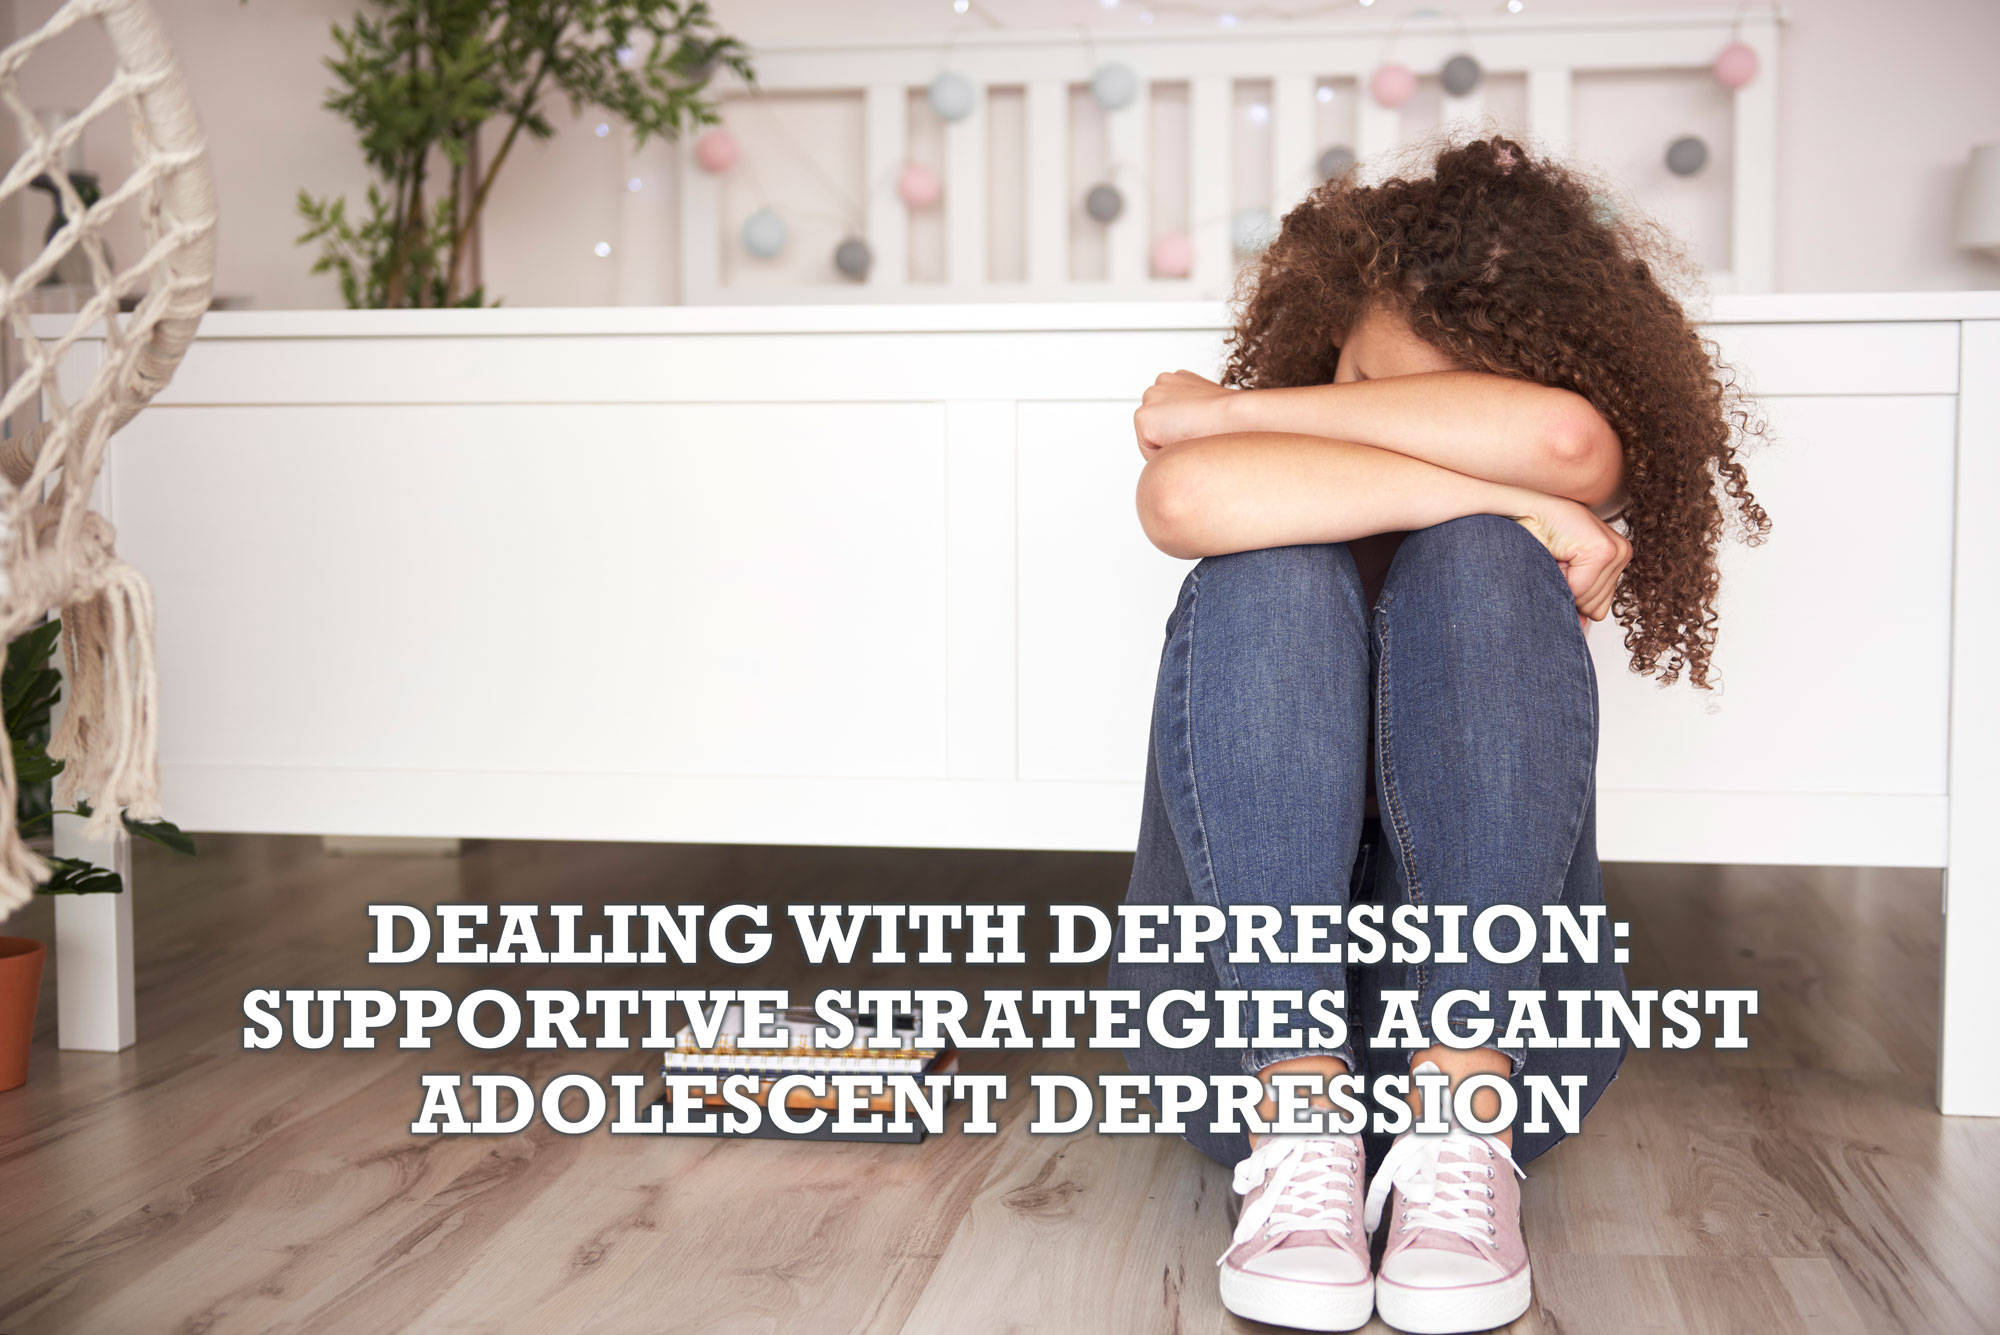 Dealing with Depression: Supportive Strategies Against Adolescent Depression